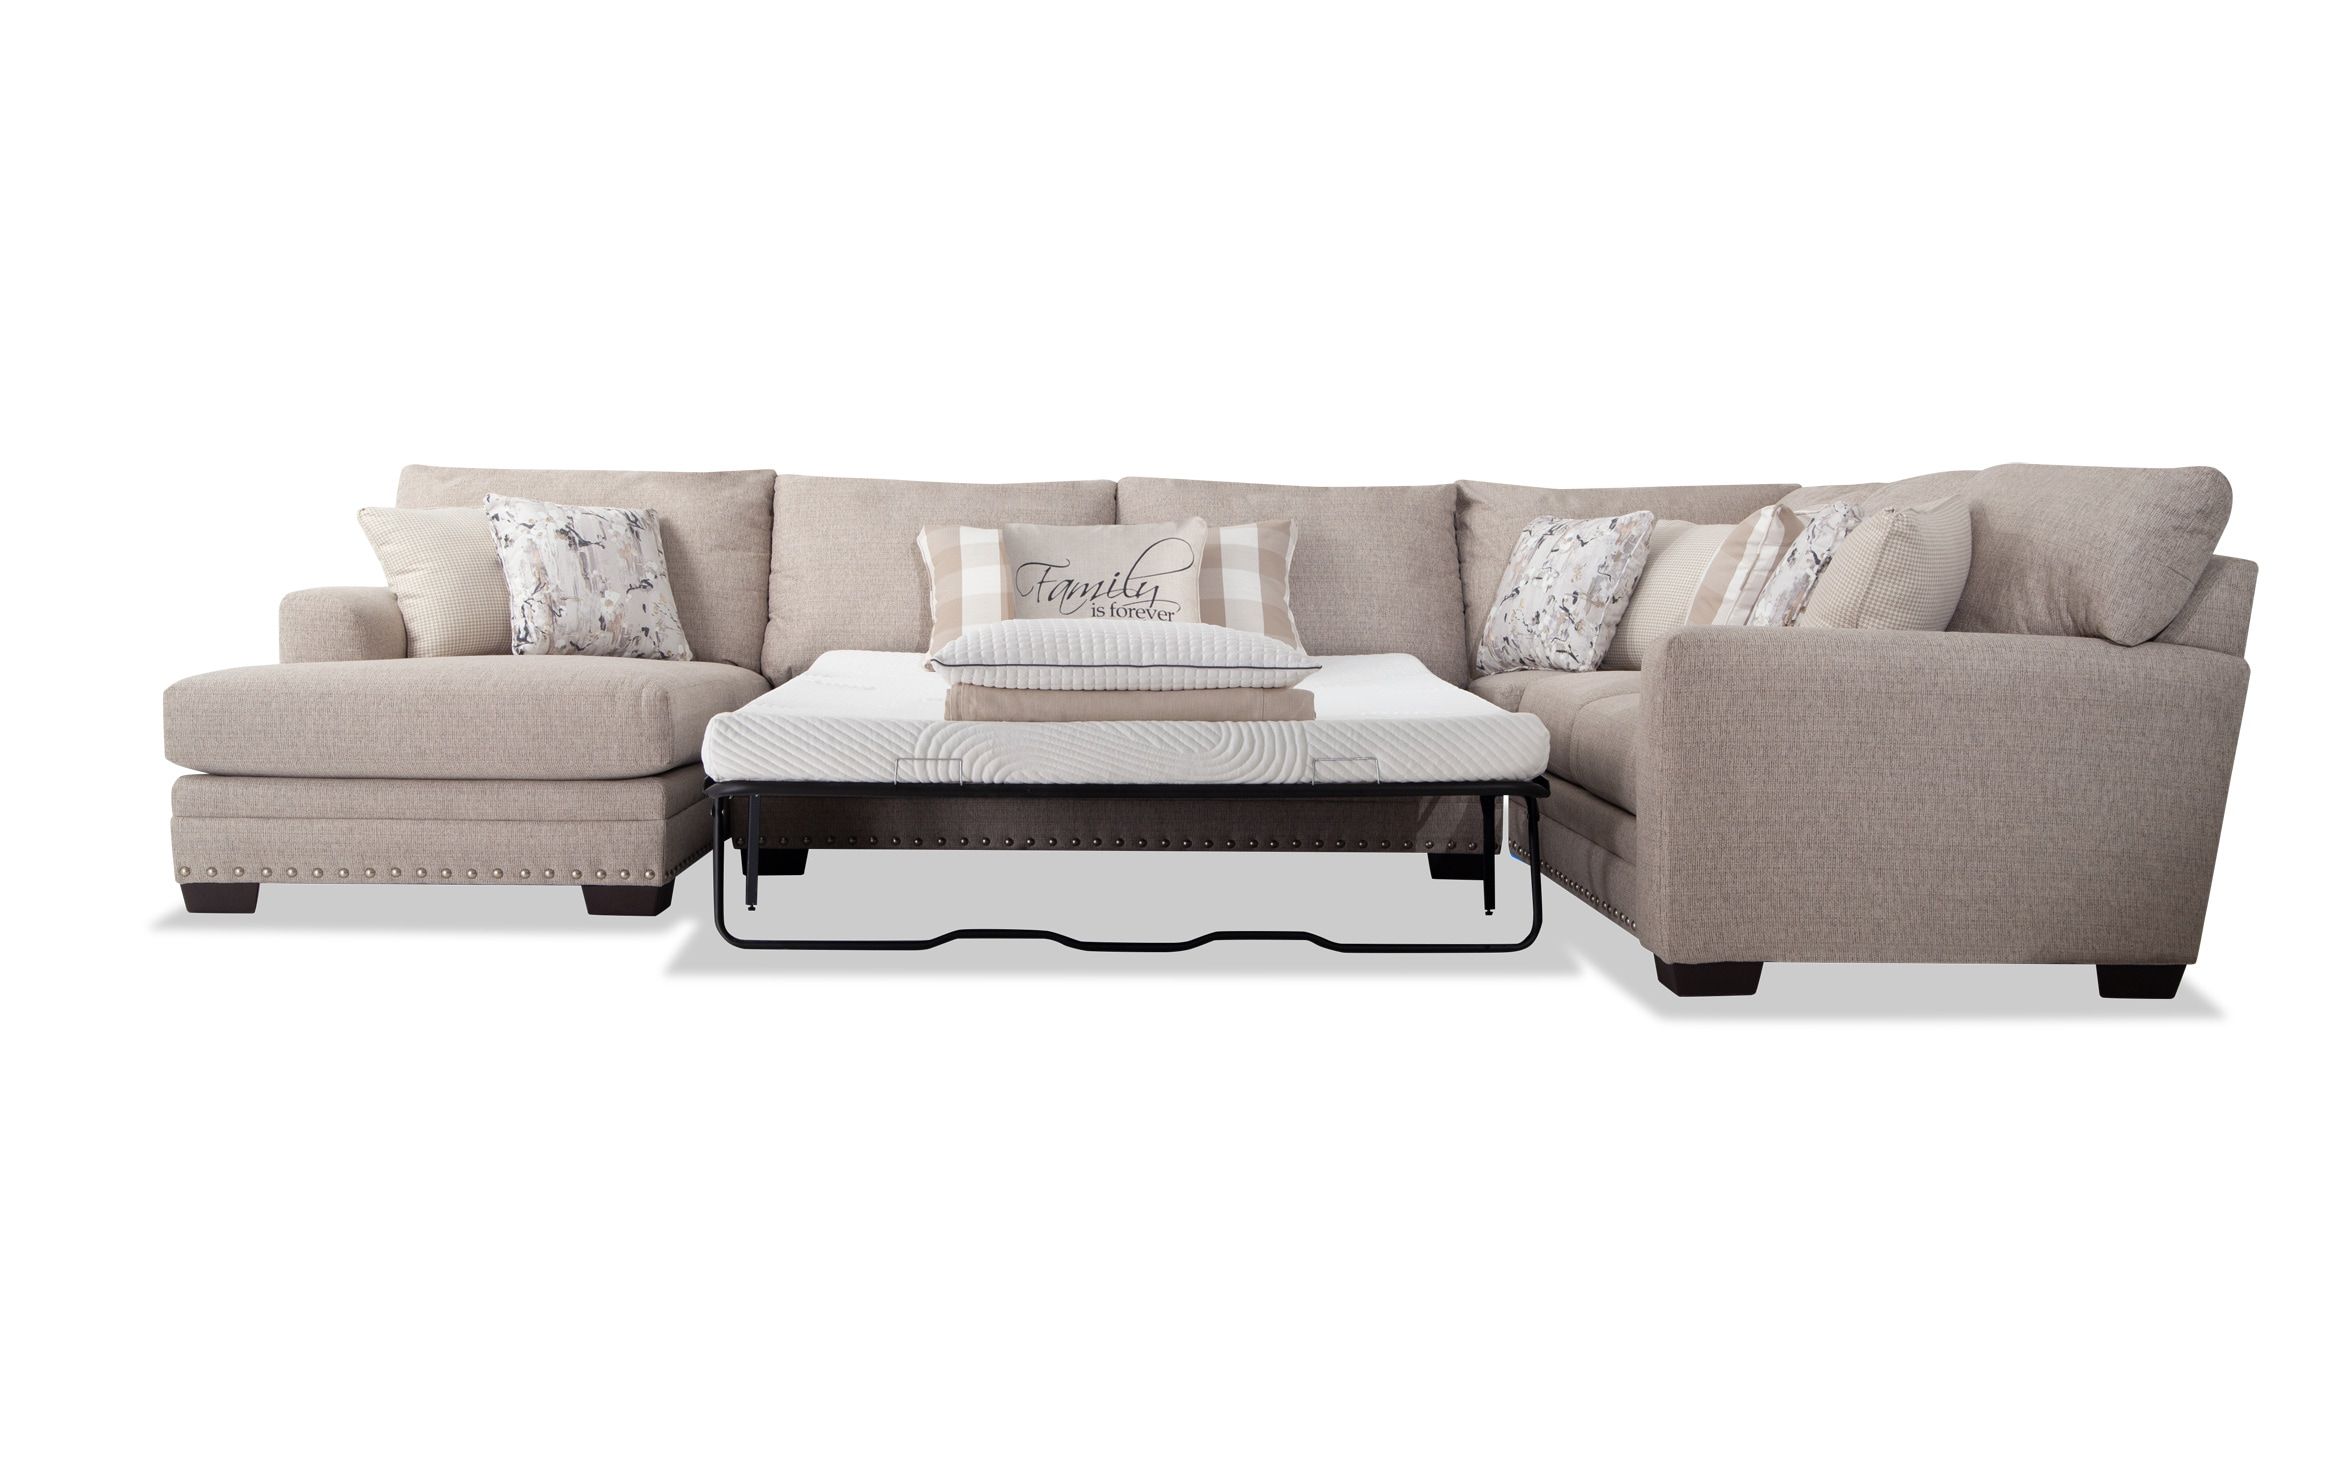 Cottage Chic Beige 4 Piece Right Arm Facing Bob O Pedic Queen Sleeper  Sectional | Bob'S Discount Furniture Throughout Left Or Right Facing Sleeper Sectional Sofas (View 14 of 15)